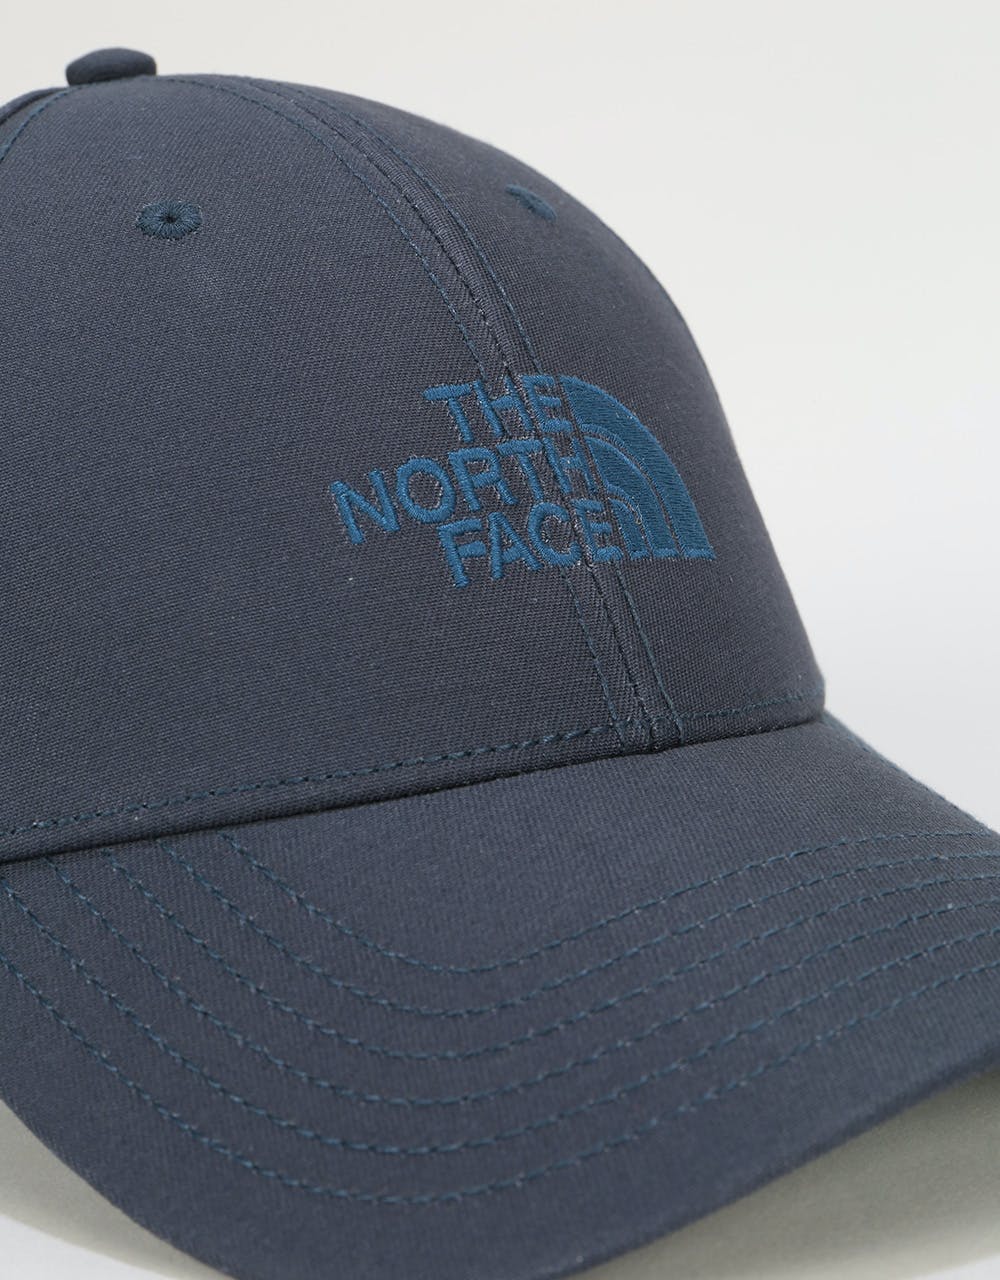 The North Face 66 Classic Cap - Urban Navy/Blue Wing Teal